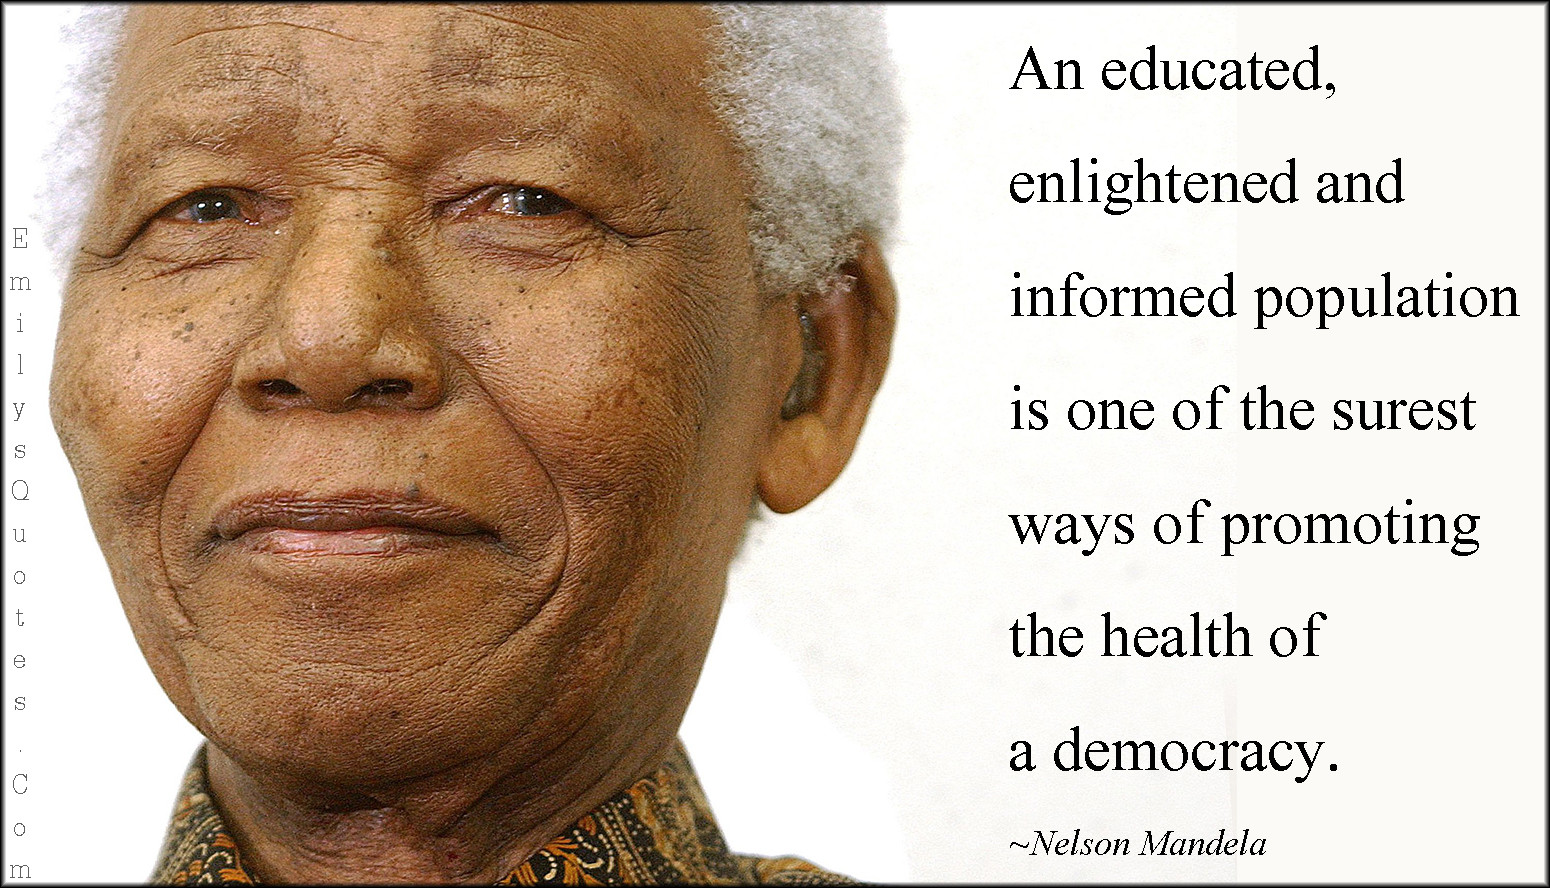 Nelson Mandela Quotes On Education
 An educated enlightened and informed population is one of